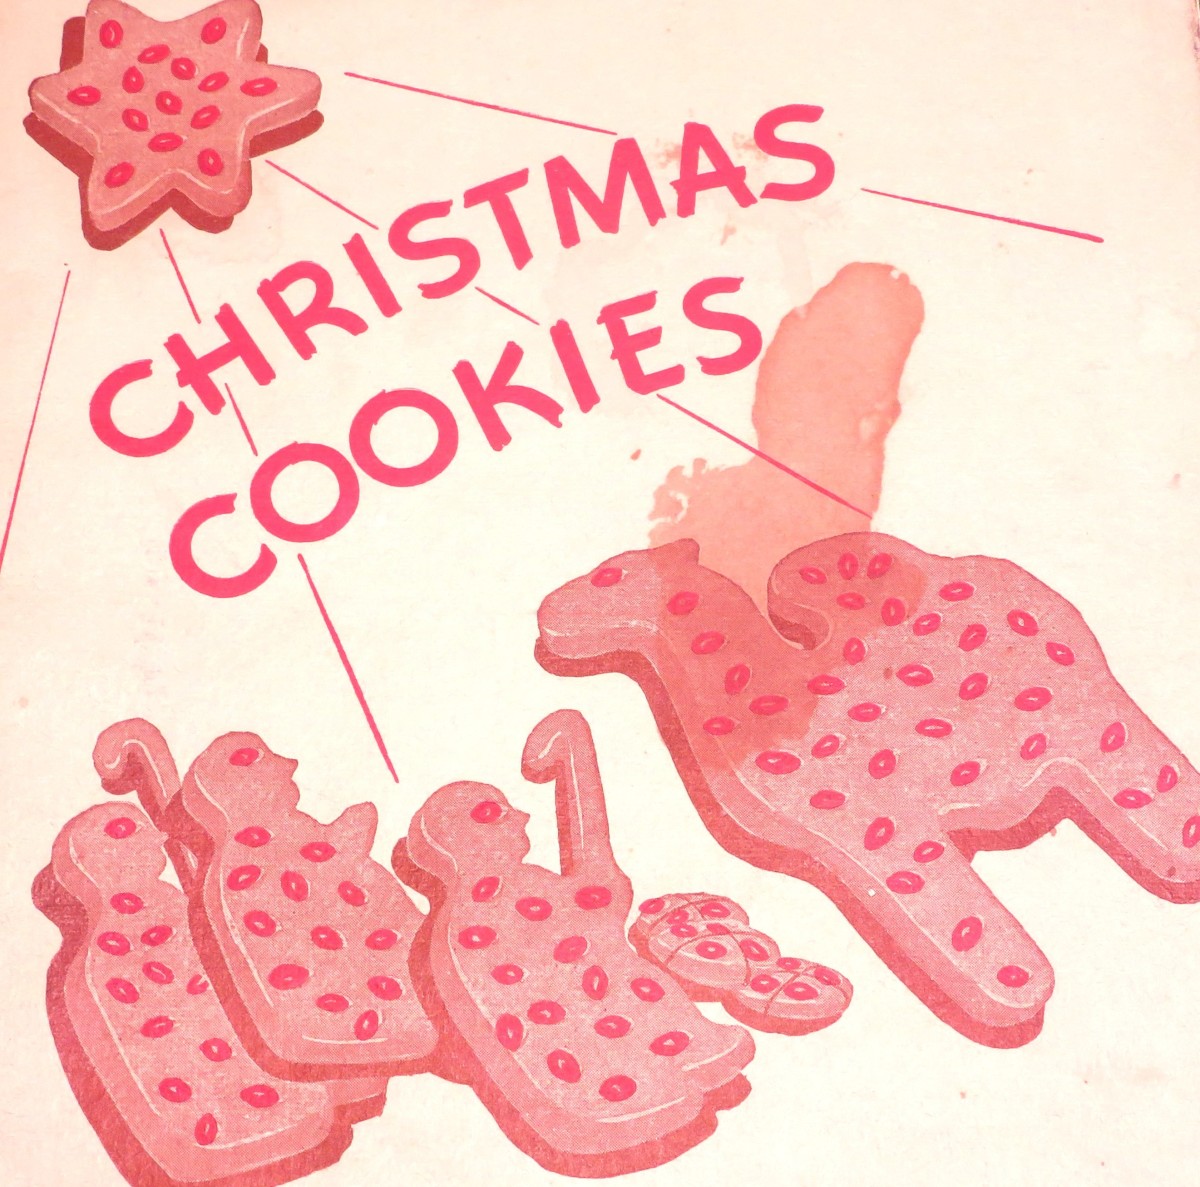 1941 Christmas Cookies Booklet: Wisconsin Electric Power Co.